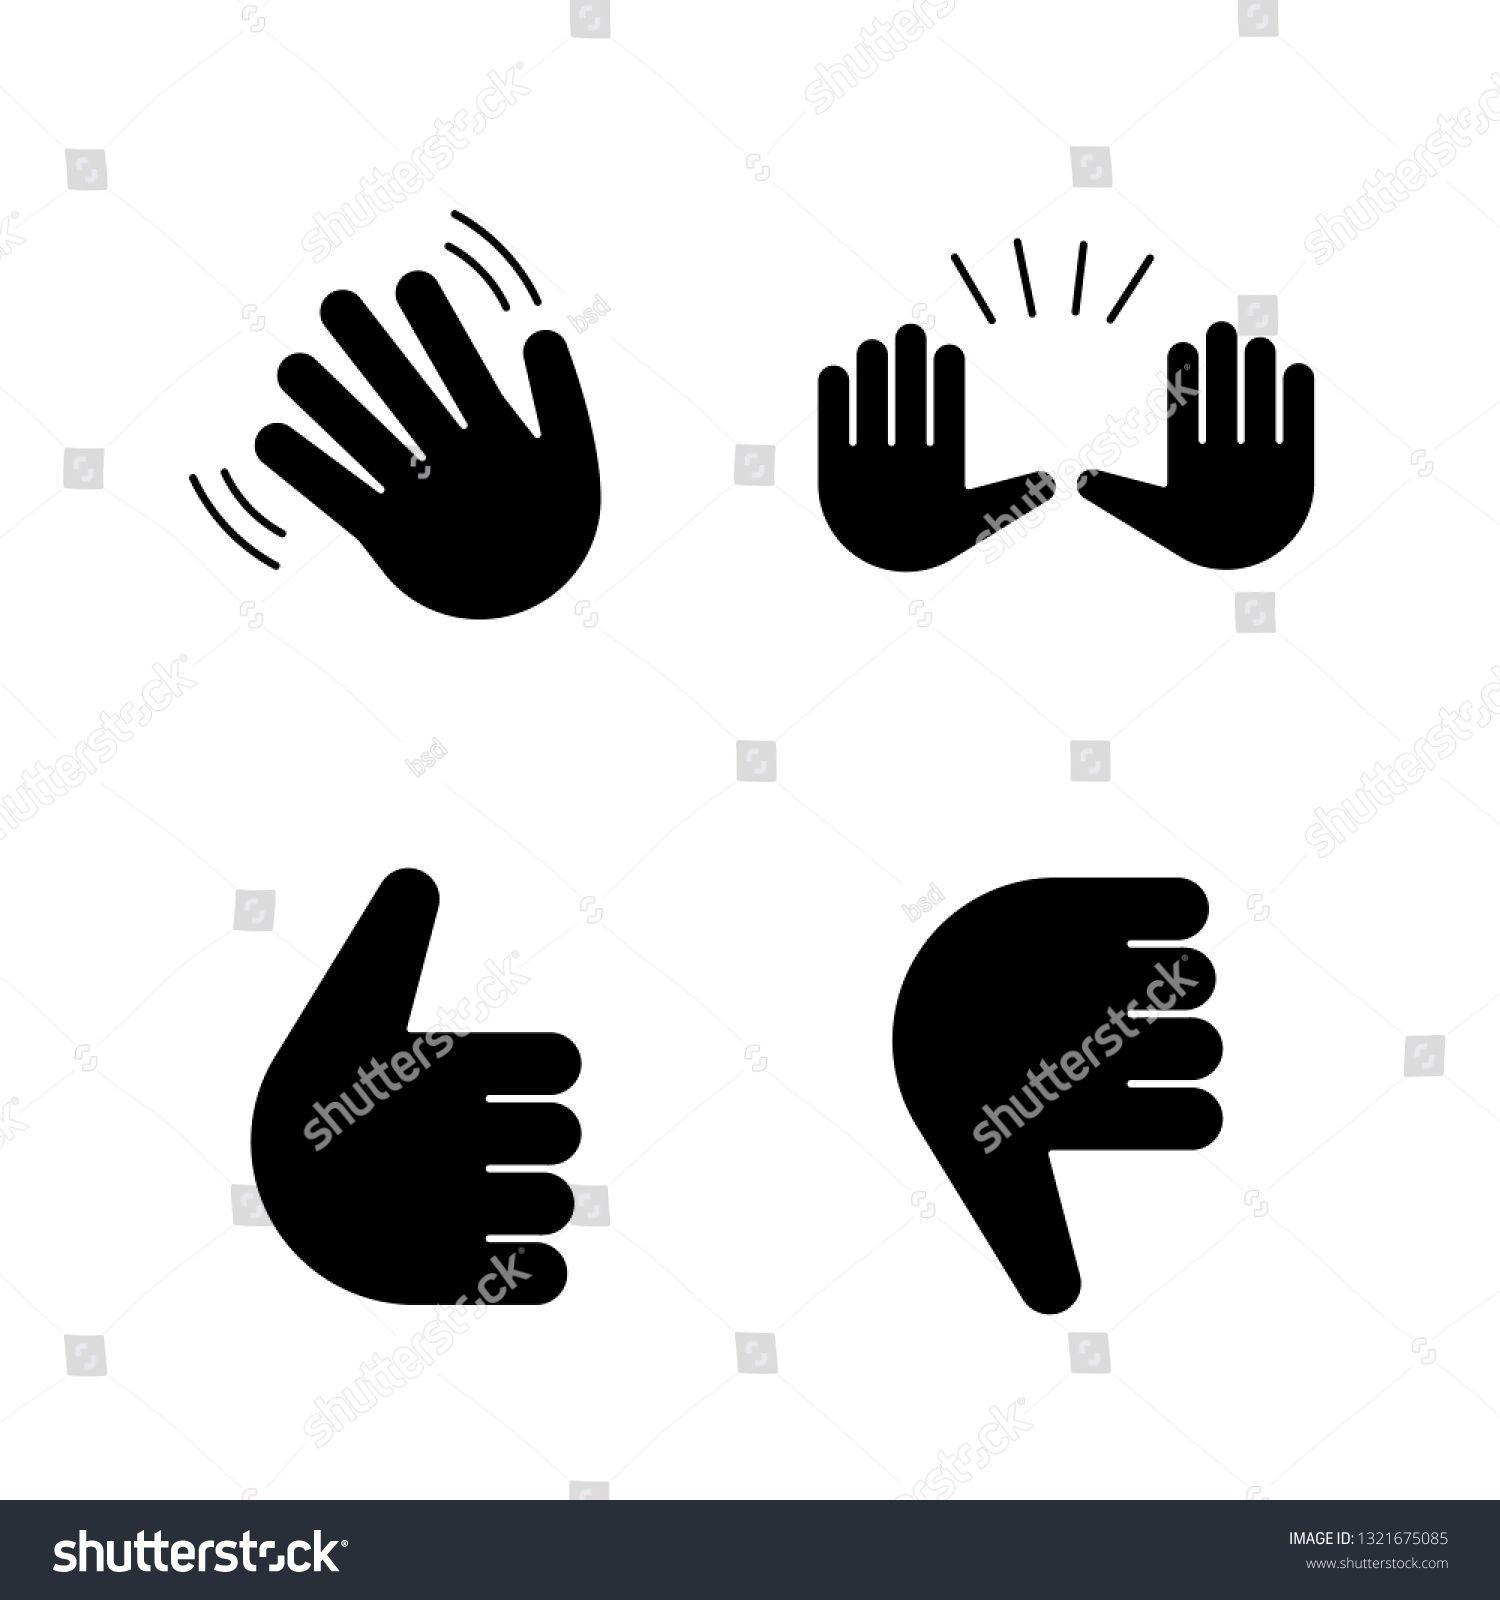 Hand Gesture Emojis Glyph Icons Set Stock Vector Royalty Free